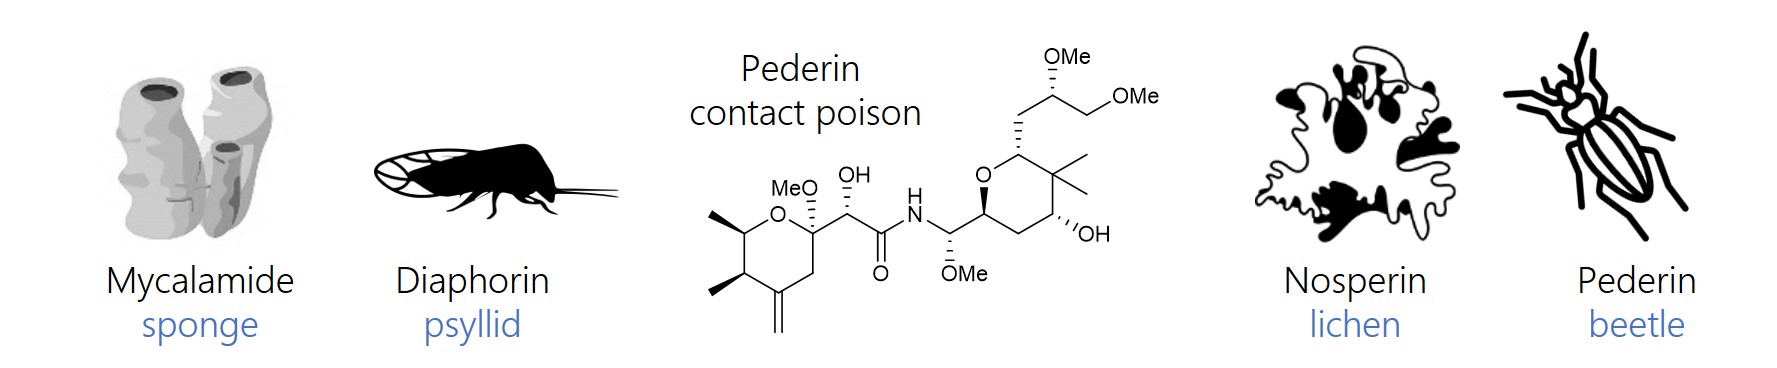 Pederin structure and sources of pederin-analogs